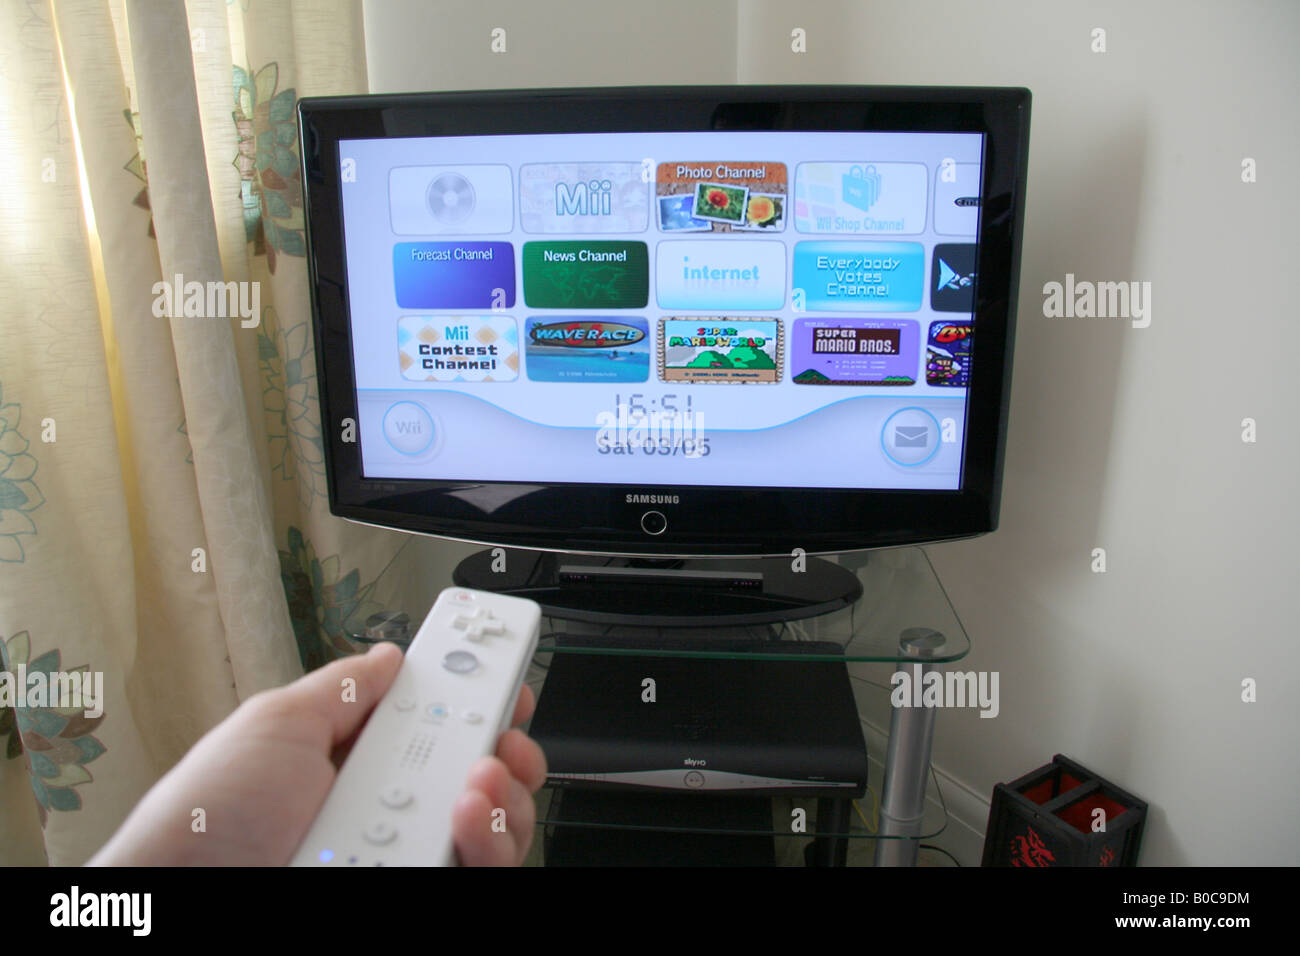 Hand Holding Nintendo wii controller pointing at the TV Stock Photo - Alamy